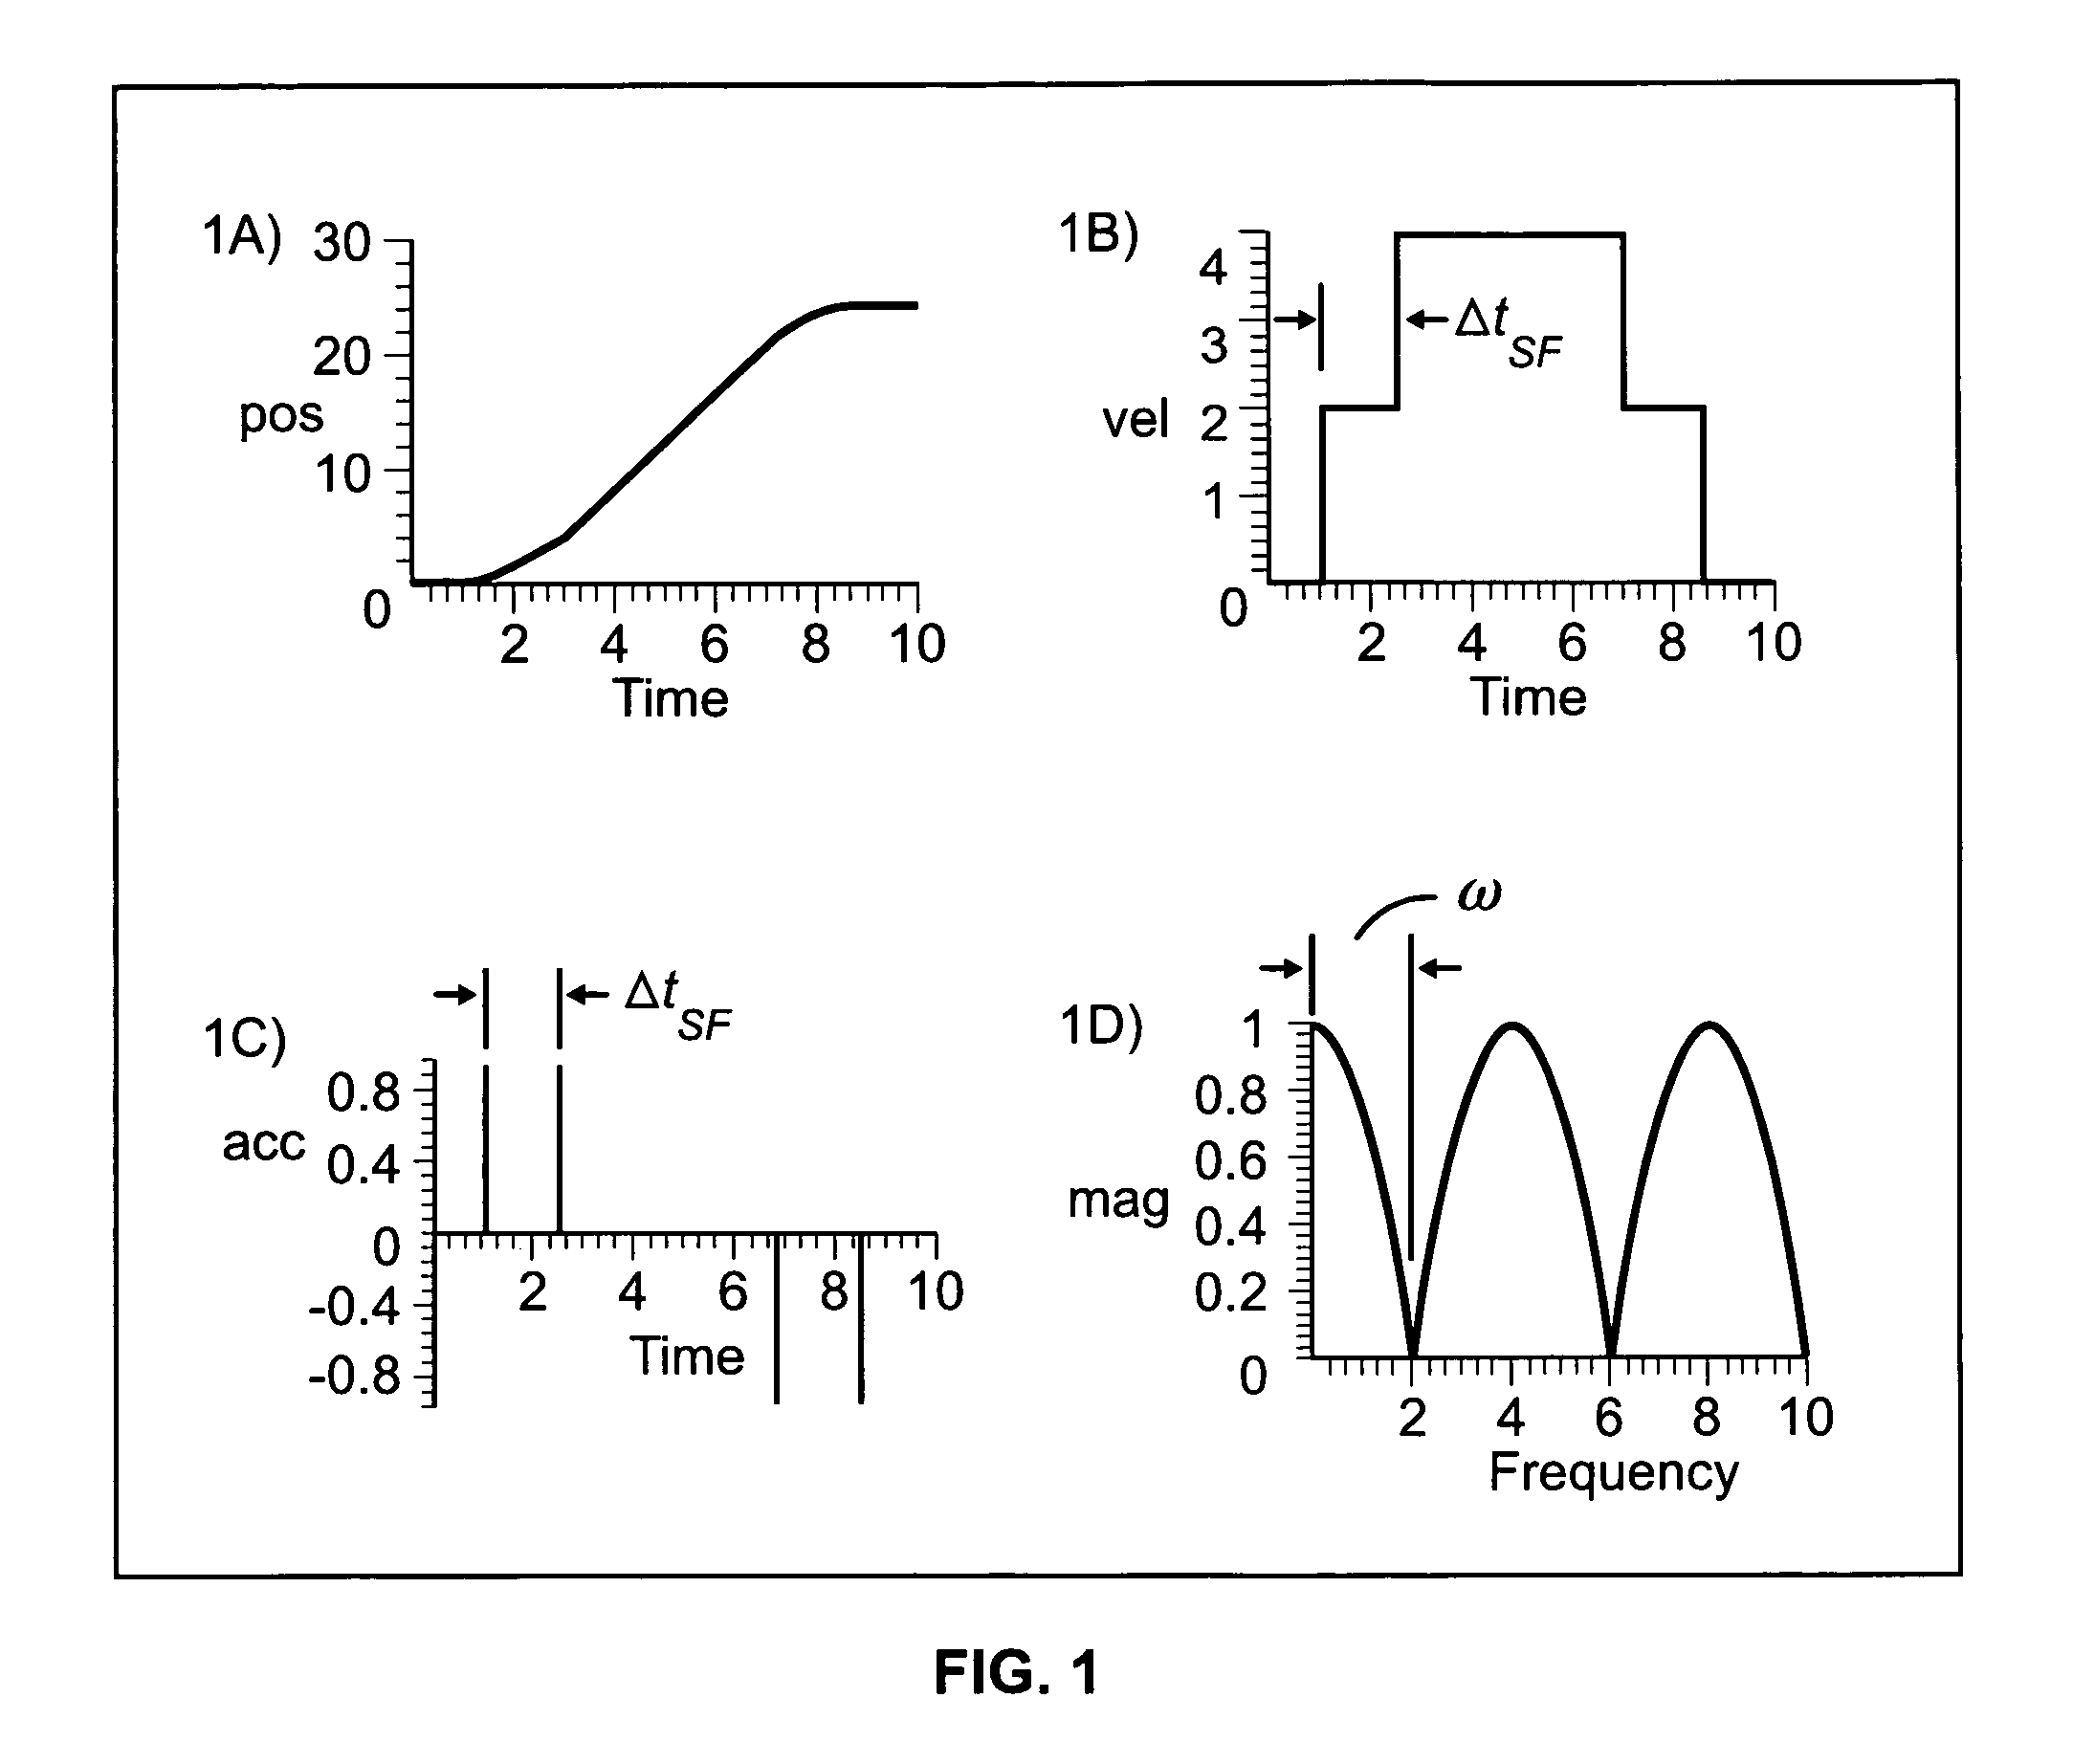 Wideband suppression of motion-induced vibration